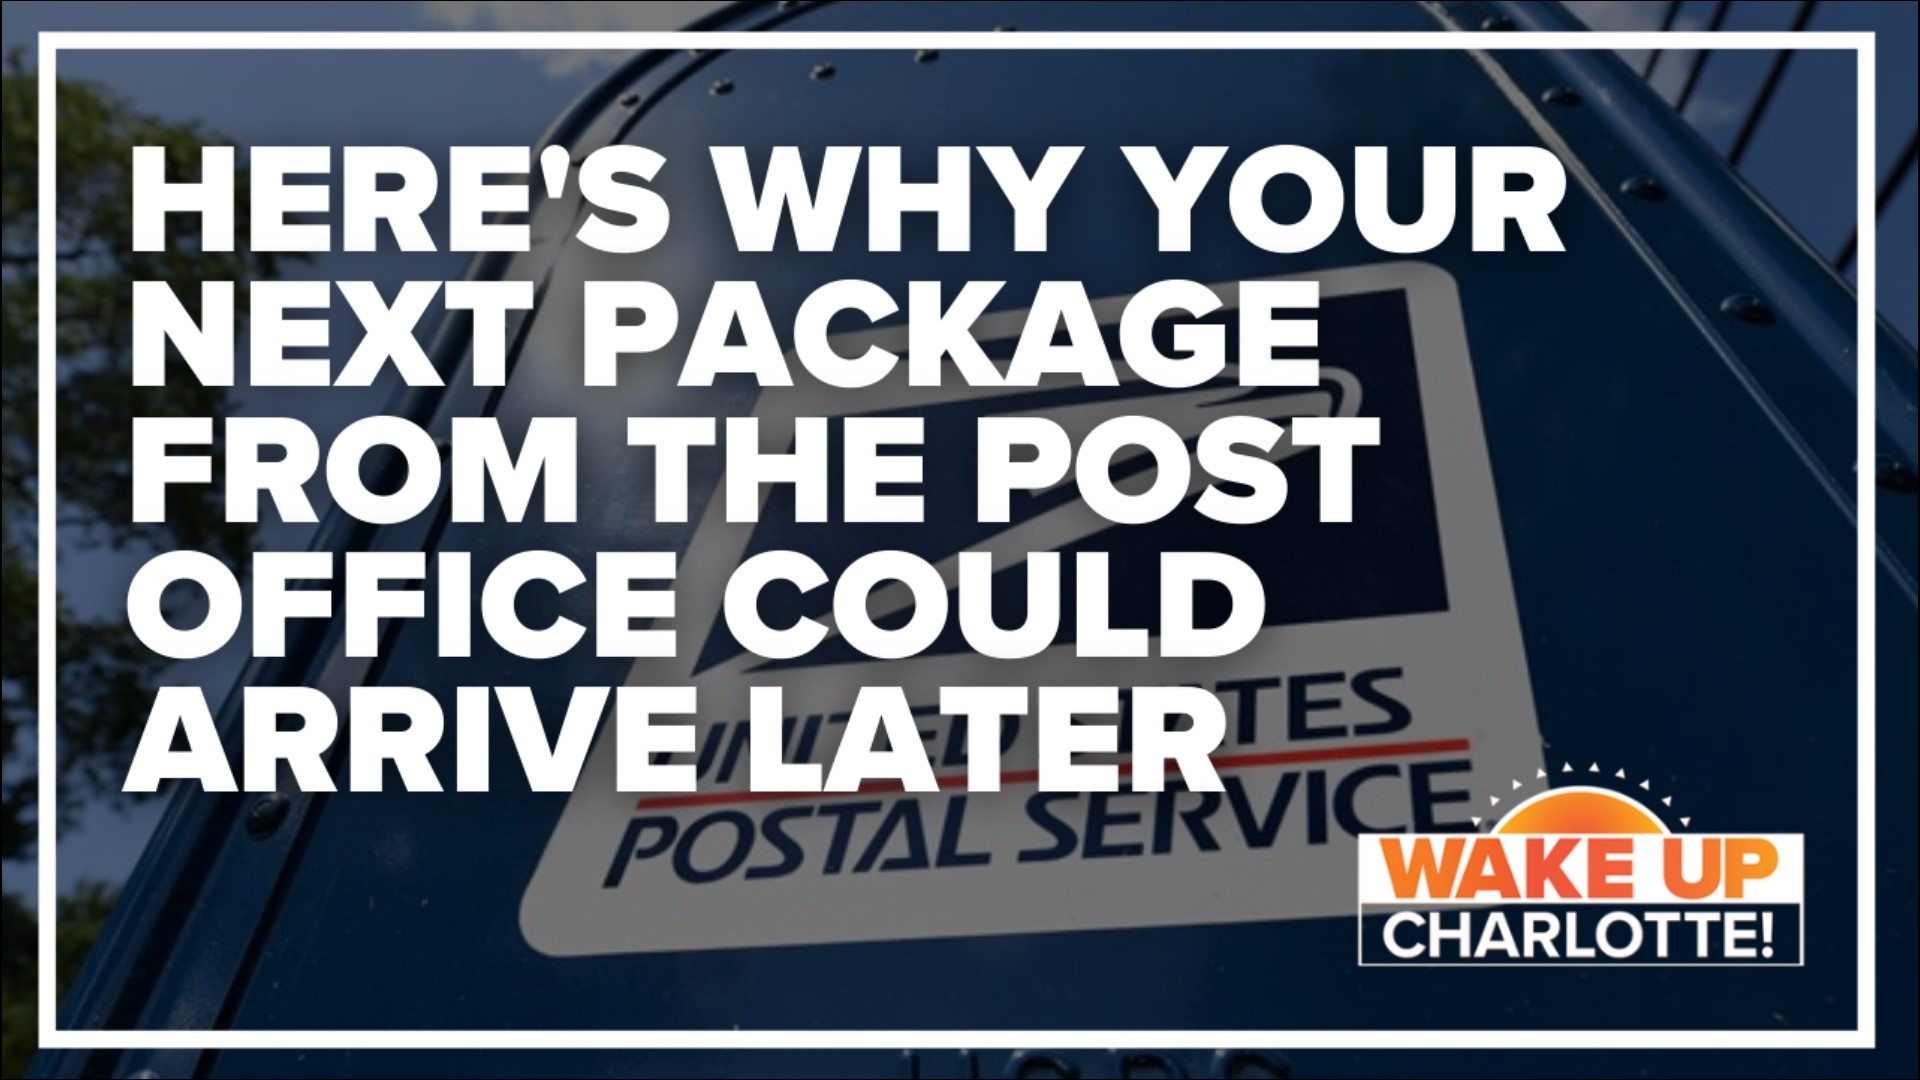 Your next package from the post office is about to arrive later.